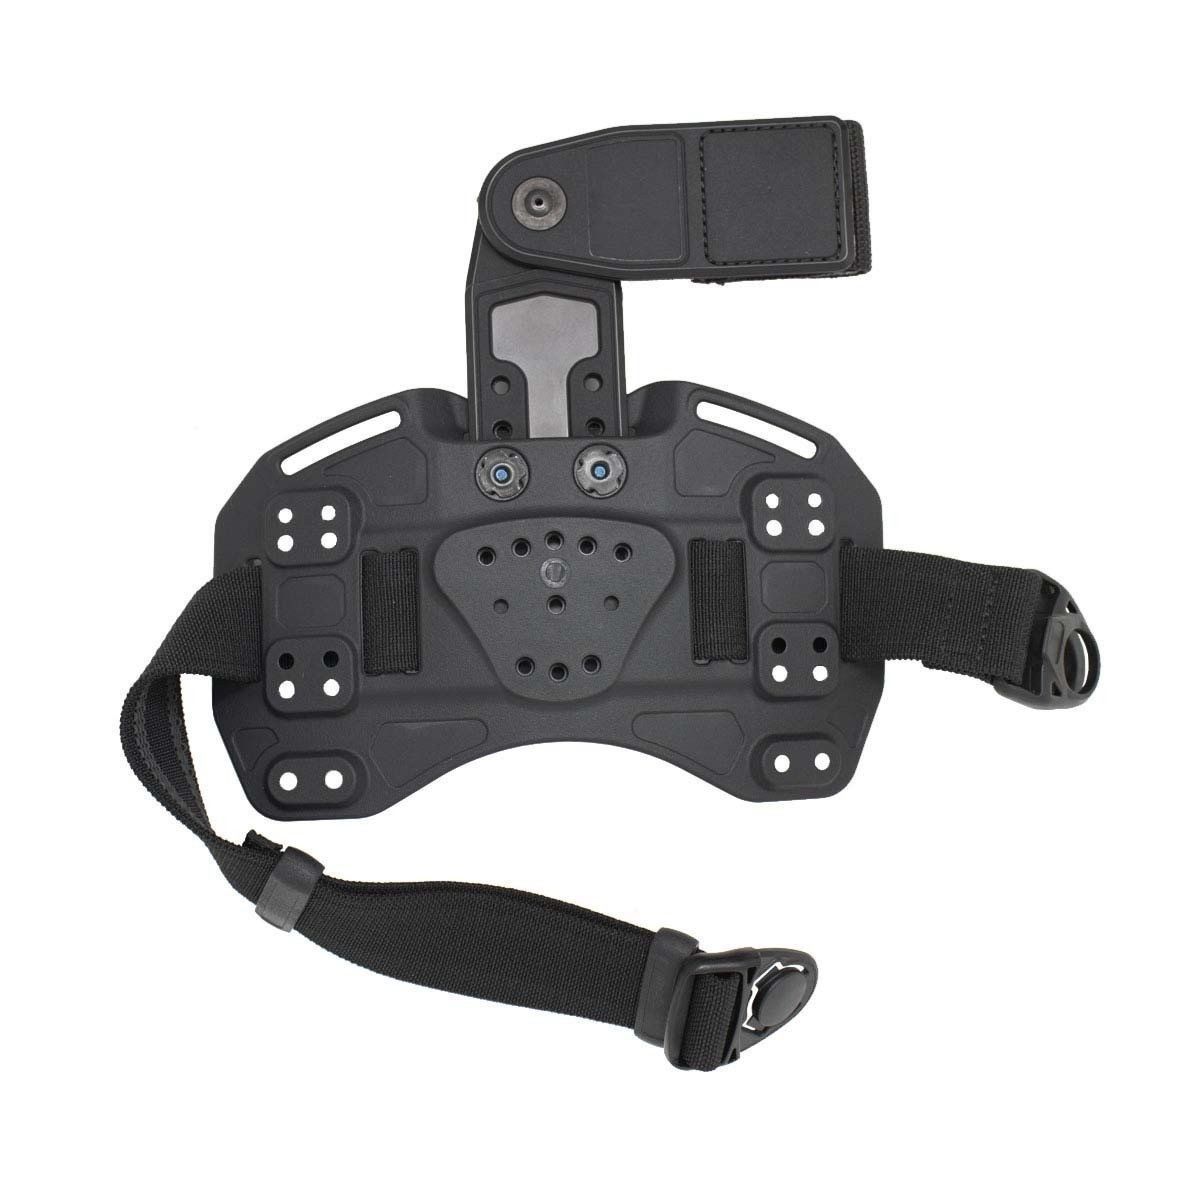 Radar thigh rig/holster - Parts & Gear Wanted - Airsoft Forums UK